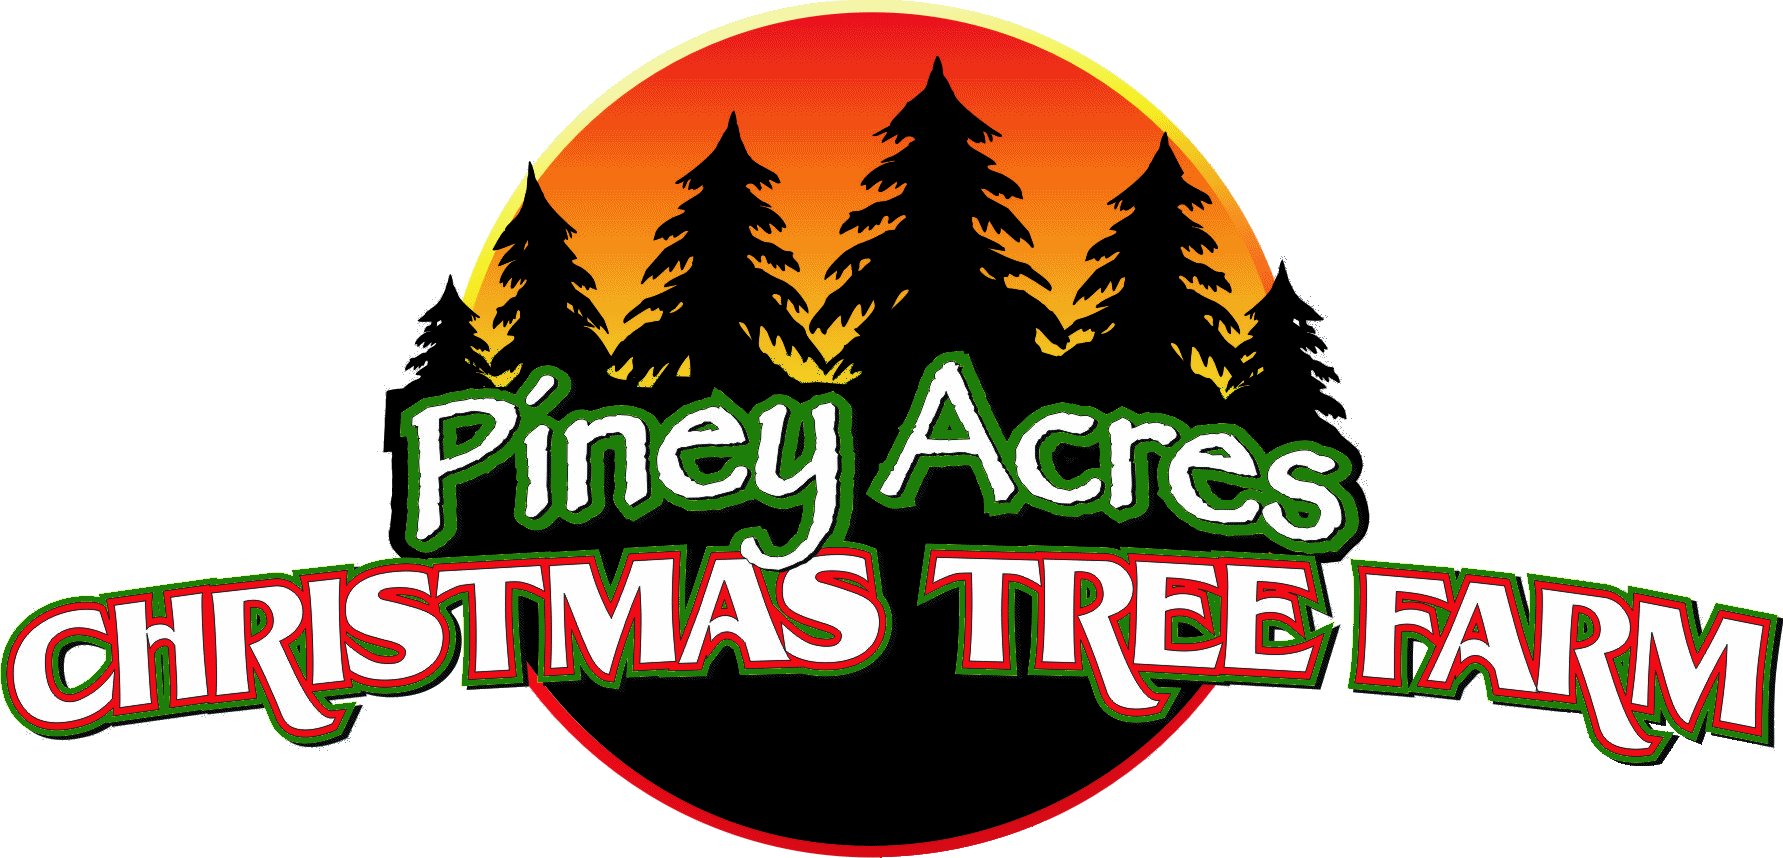 Business logo of Piney Acres